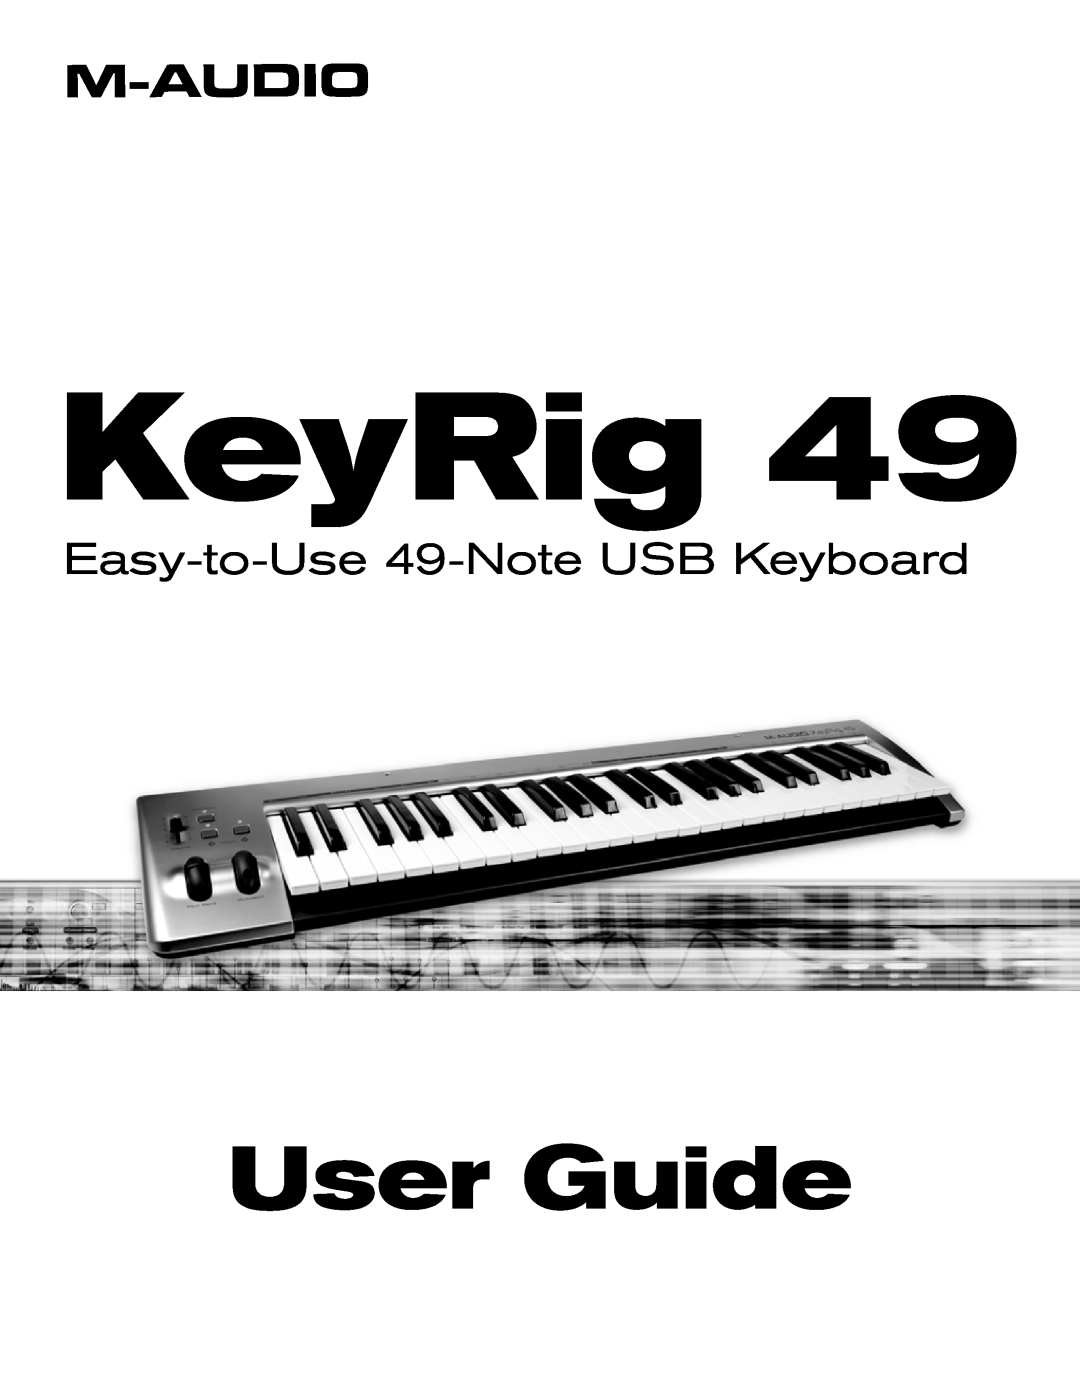 M-Audio manual User Guide, Easy-to-Use 49-NoteUSB Keyboard 